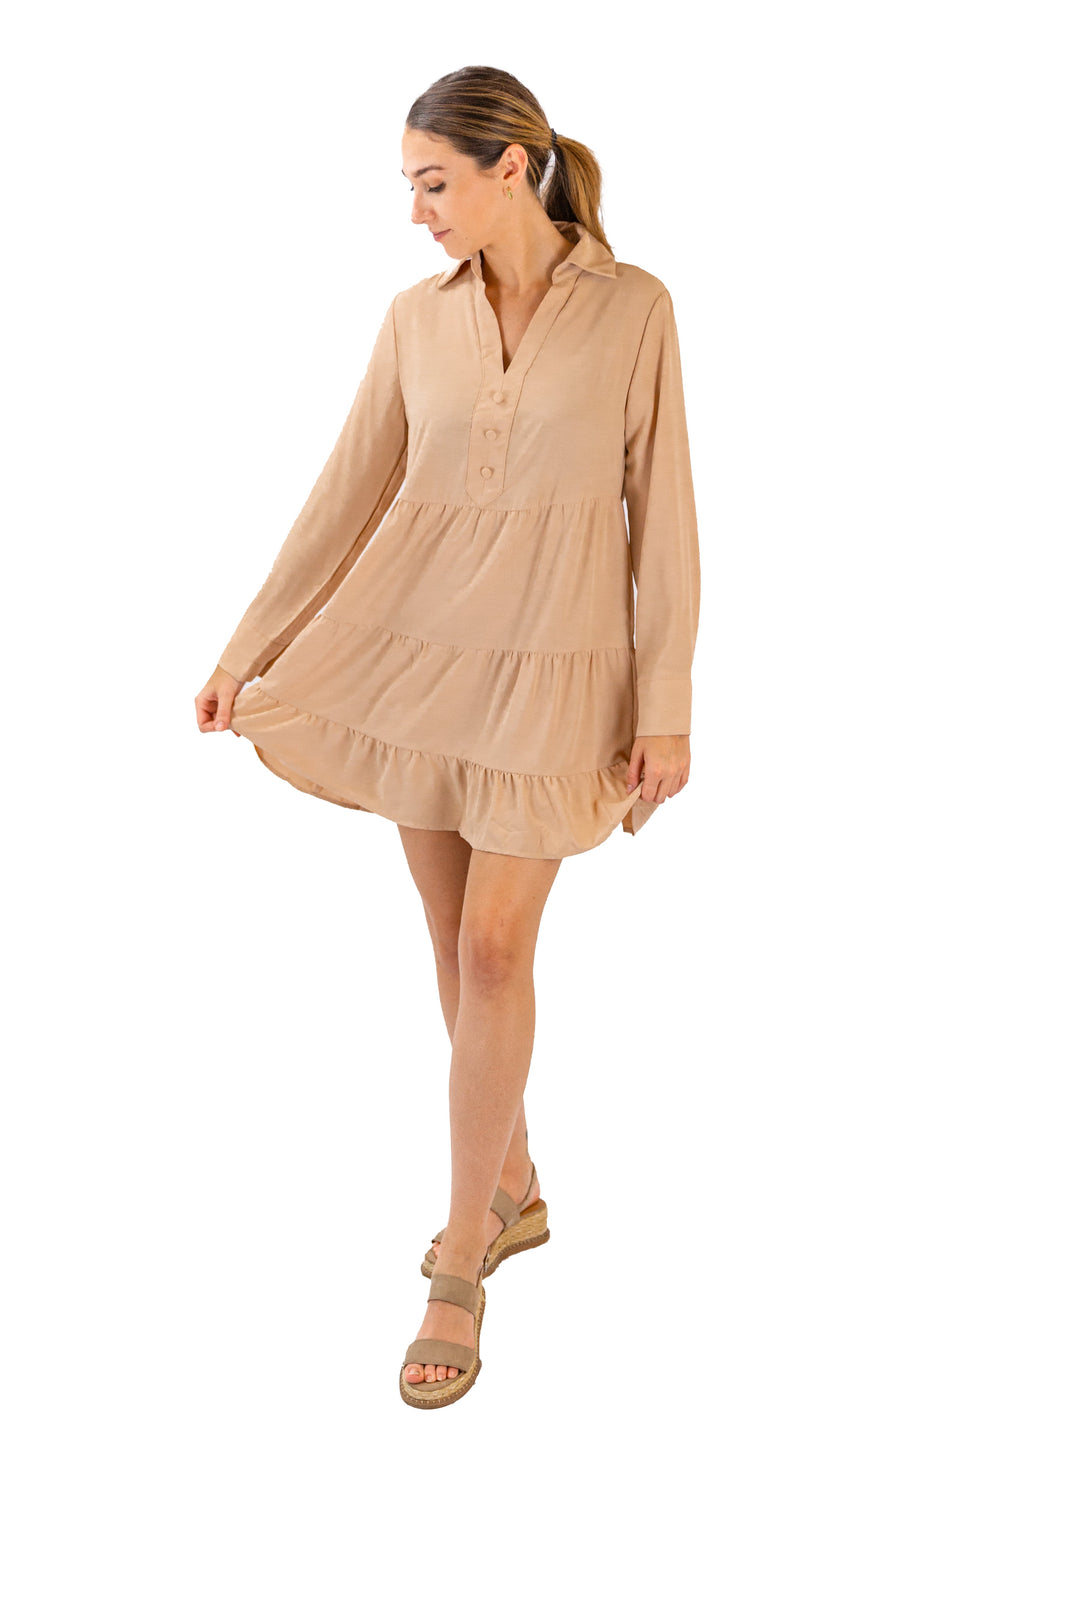 Elegant Beige Day Dress by Fabonics with Ruffles, Long Sleeves, and Stylish Collar